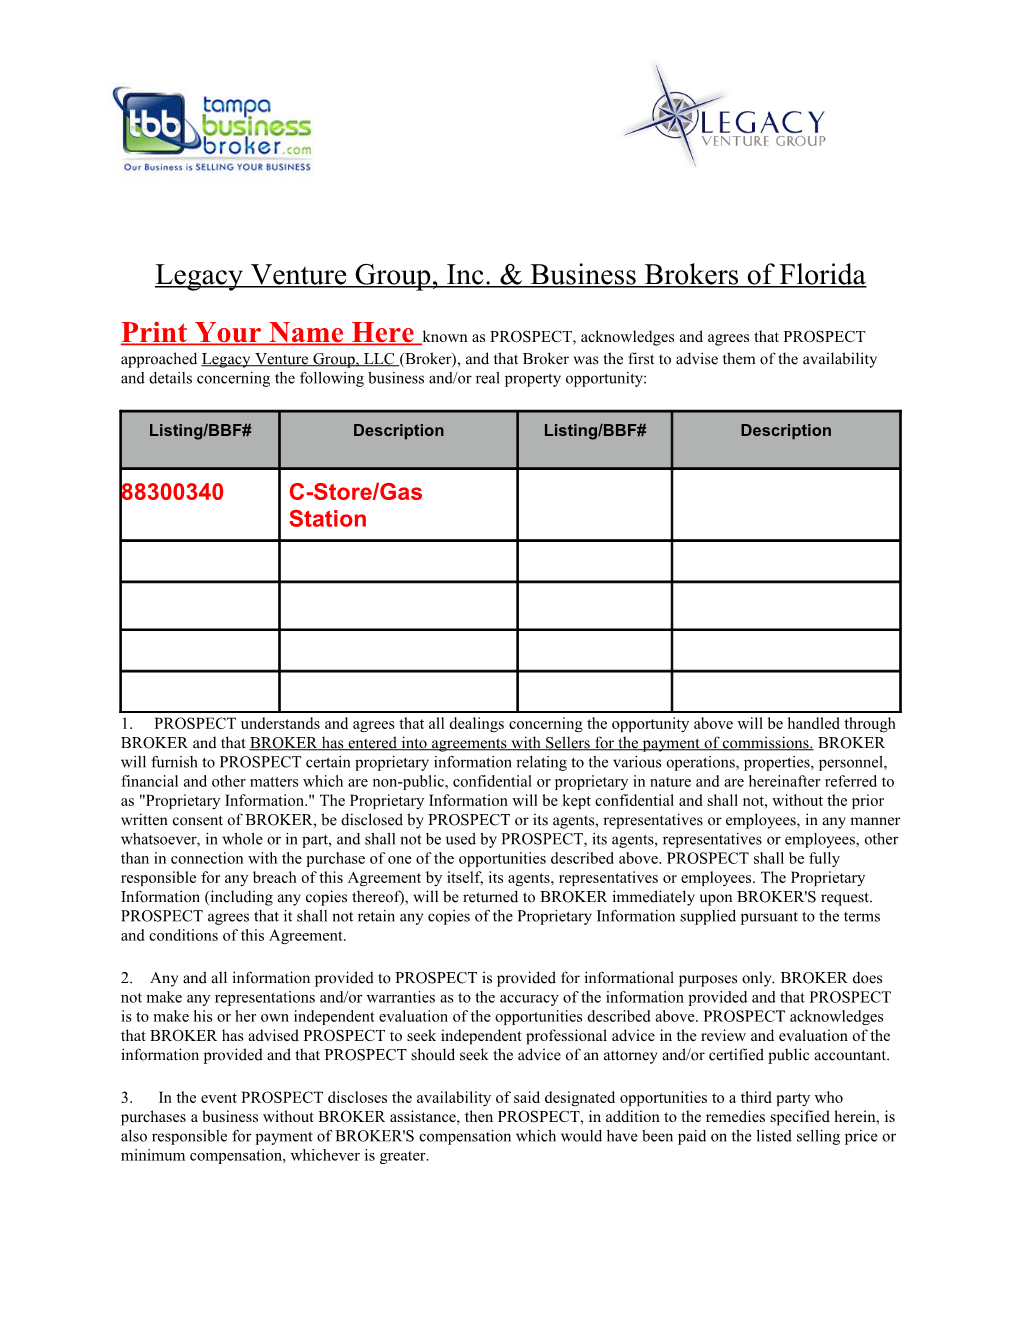 Legacy Venture Group, Inc. & Business Brokers of Florida